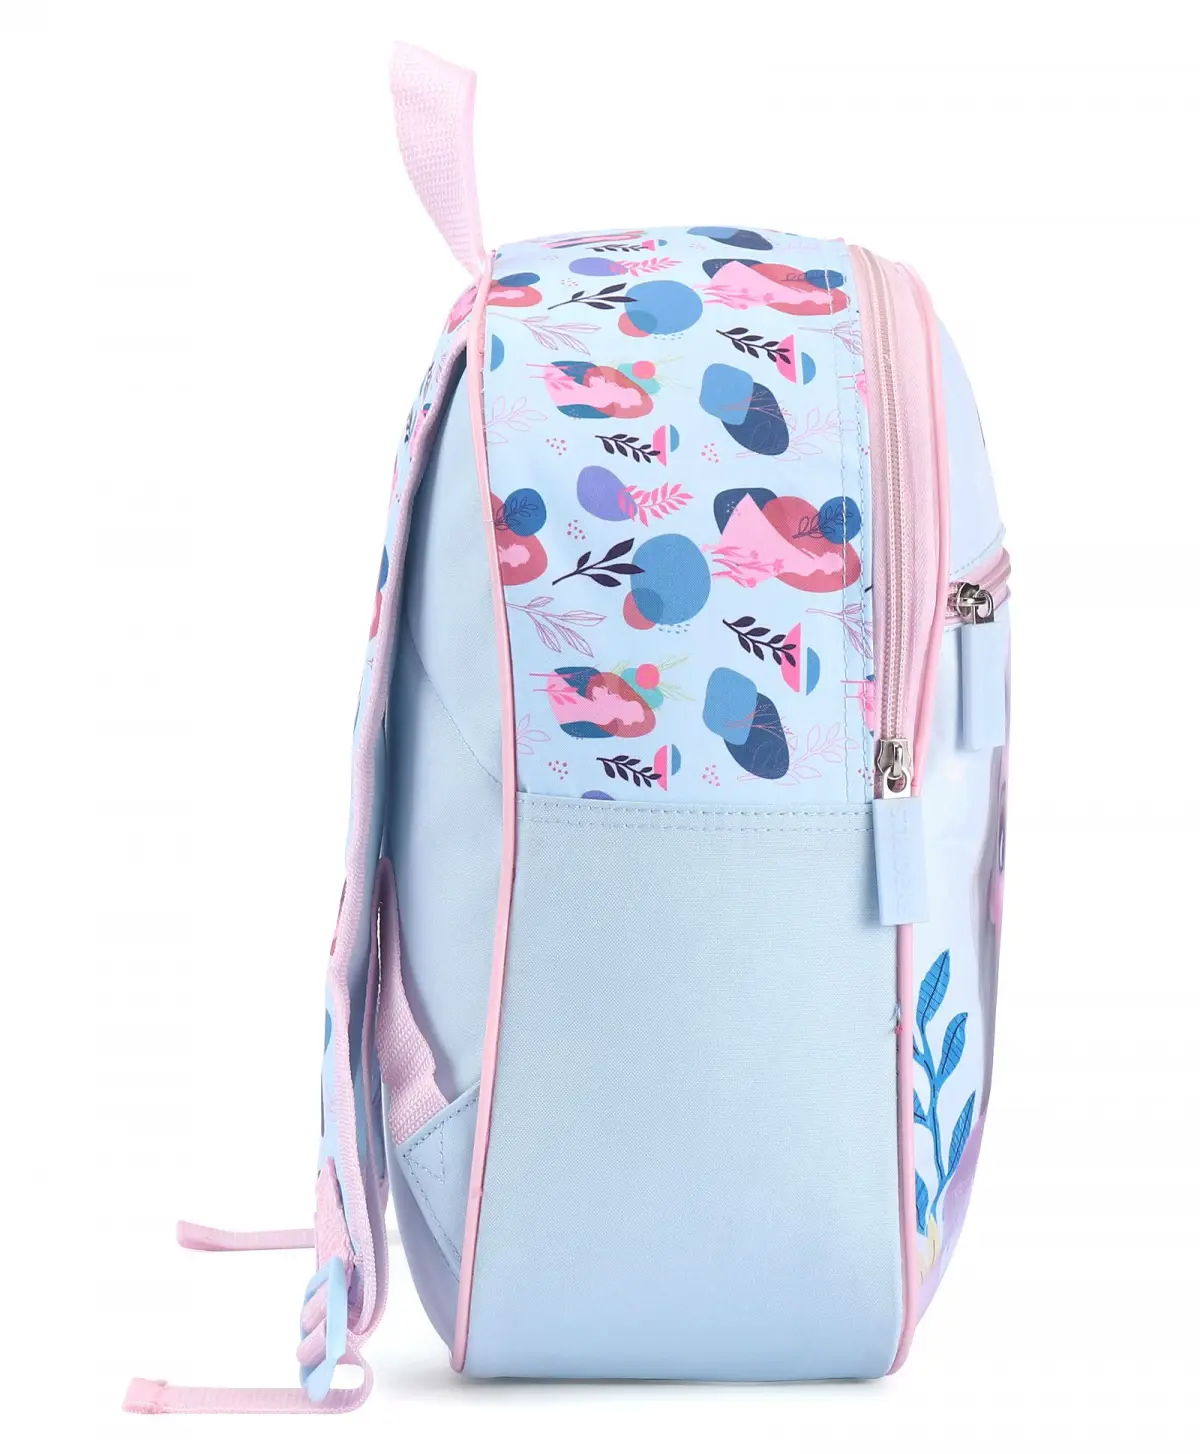 Striders 13 inches Frozen-Inspired School Bag for Winter Wonderland Adventures Multicolor For Kids Ages 2Y+